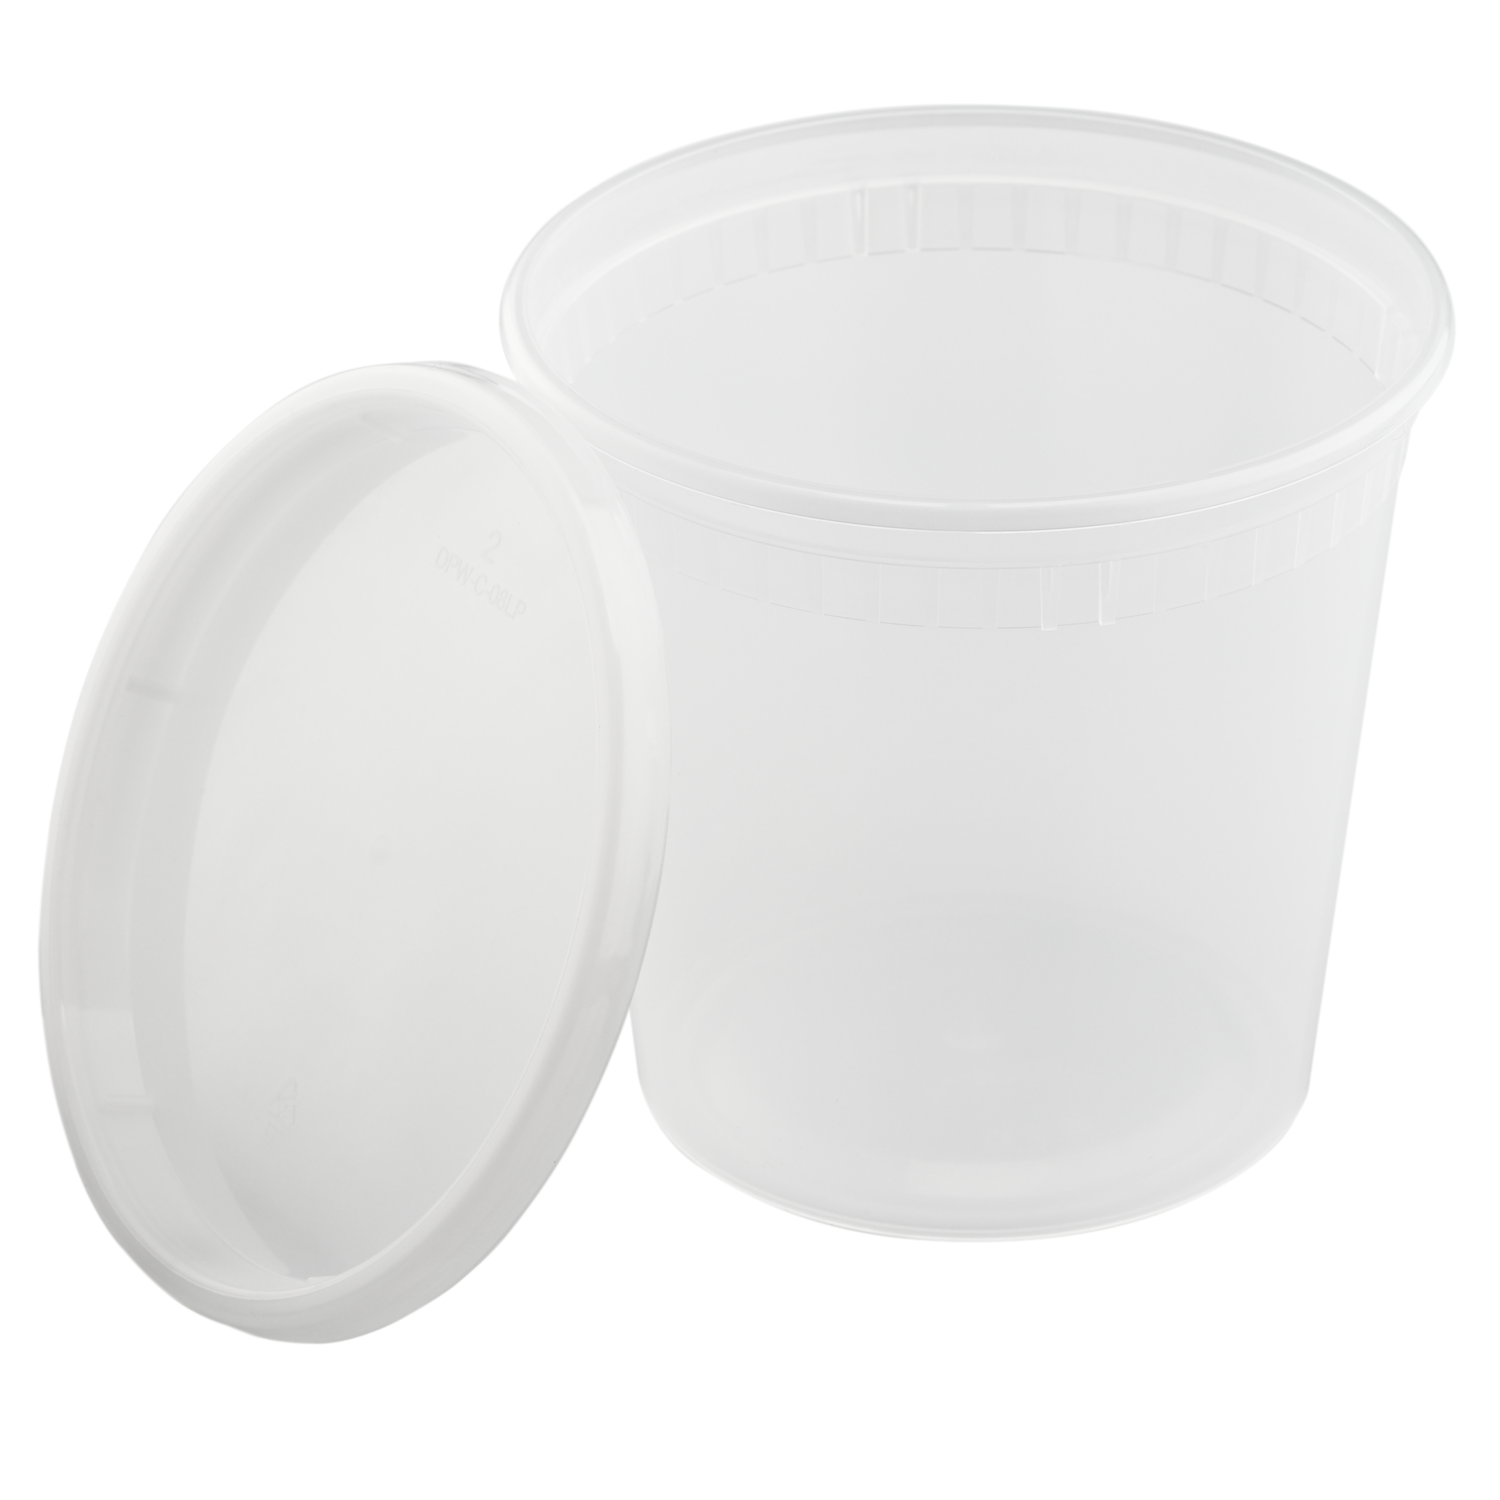 Choice White Round Microwavable Container w/ Lid (24 oz.)